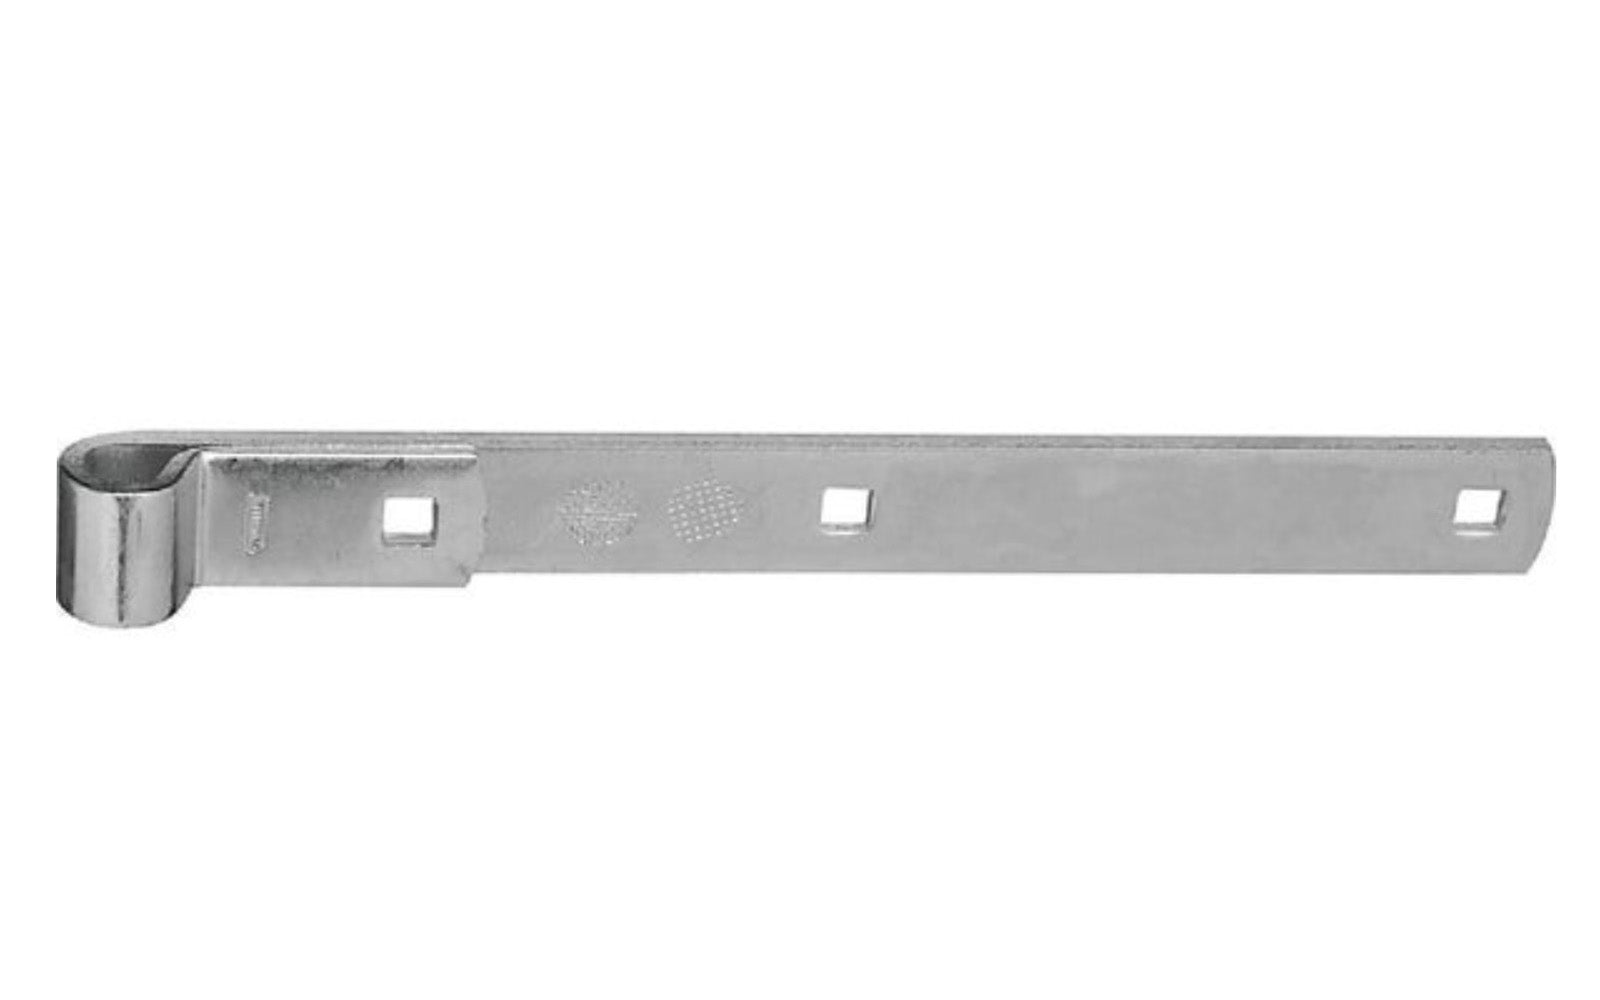 These zinc-plated hinge straps are designed to use with screw hooks for gates. Zinc-plated to resist corrosion. Made of hot-rolled steel. Coated with 